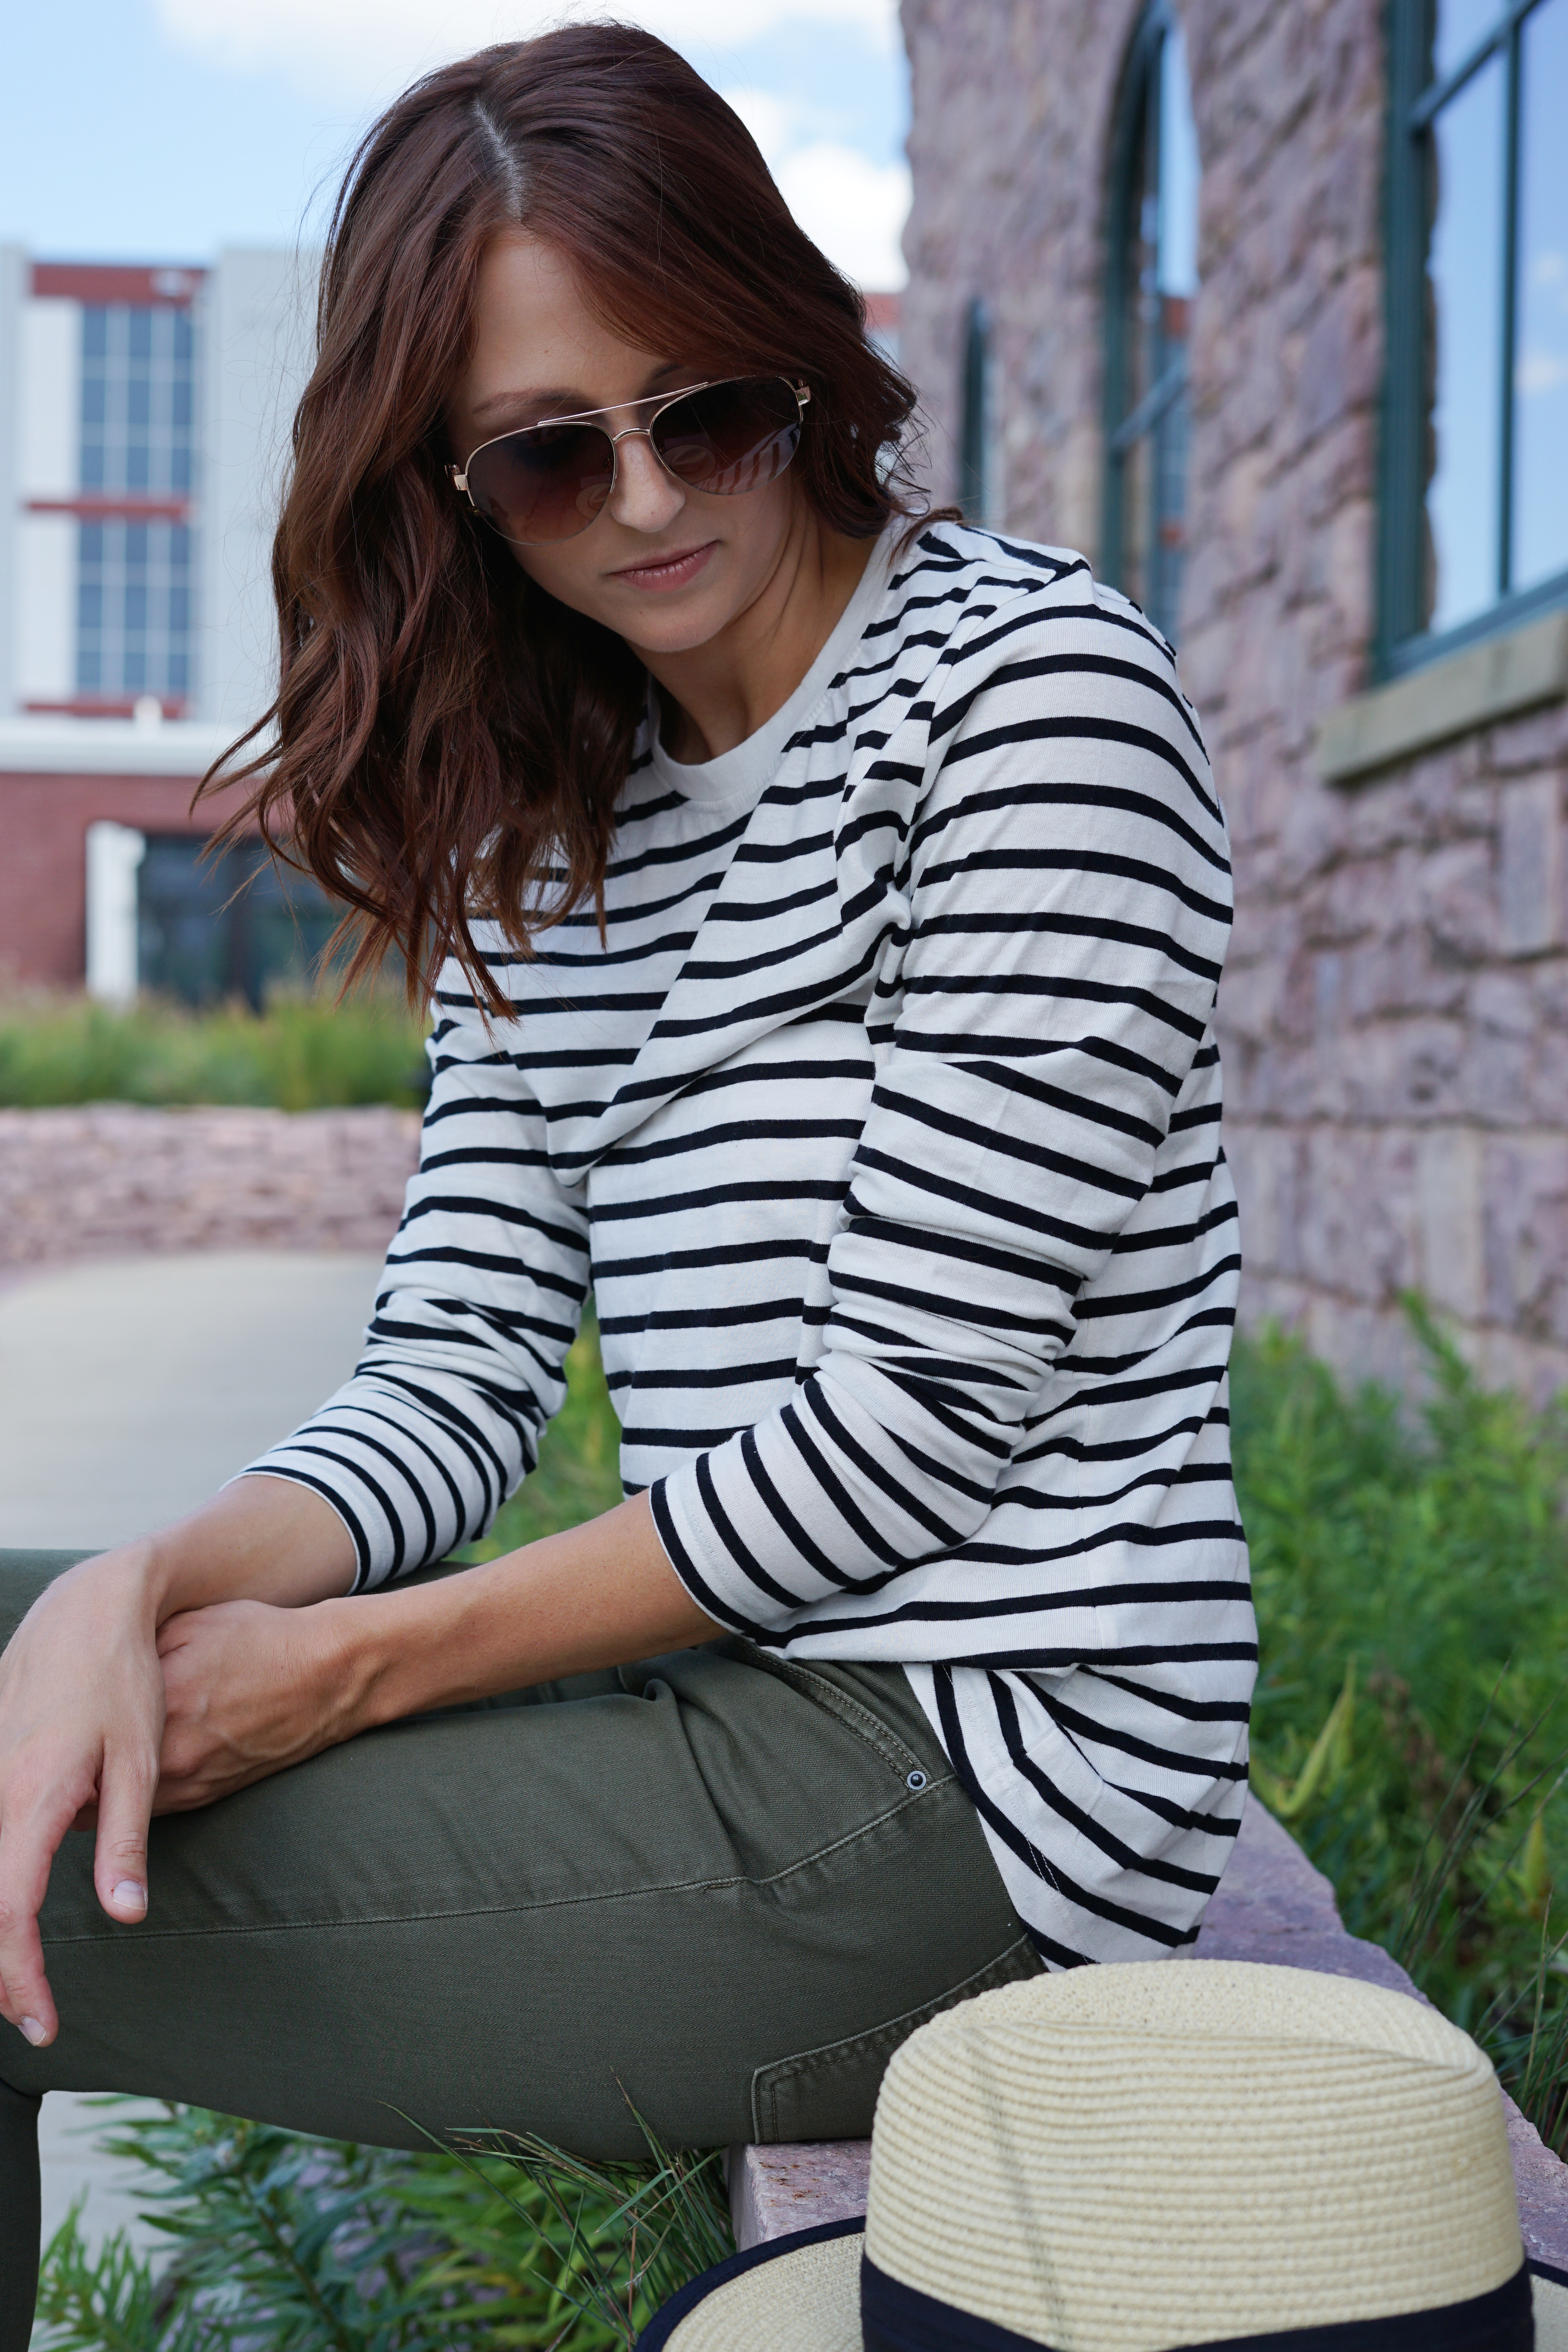 Transitional Pieces - Midwest In Style